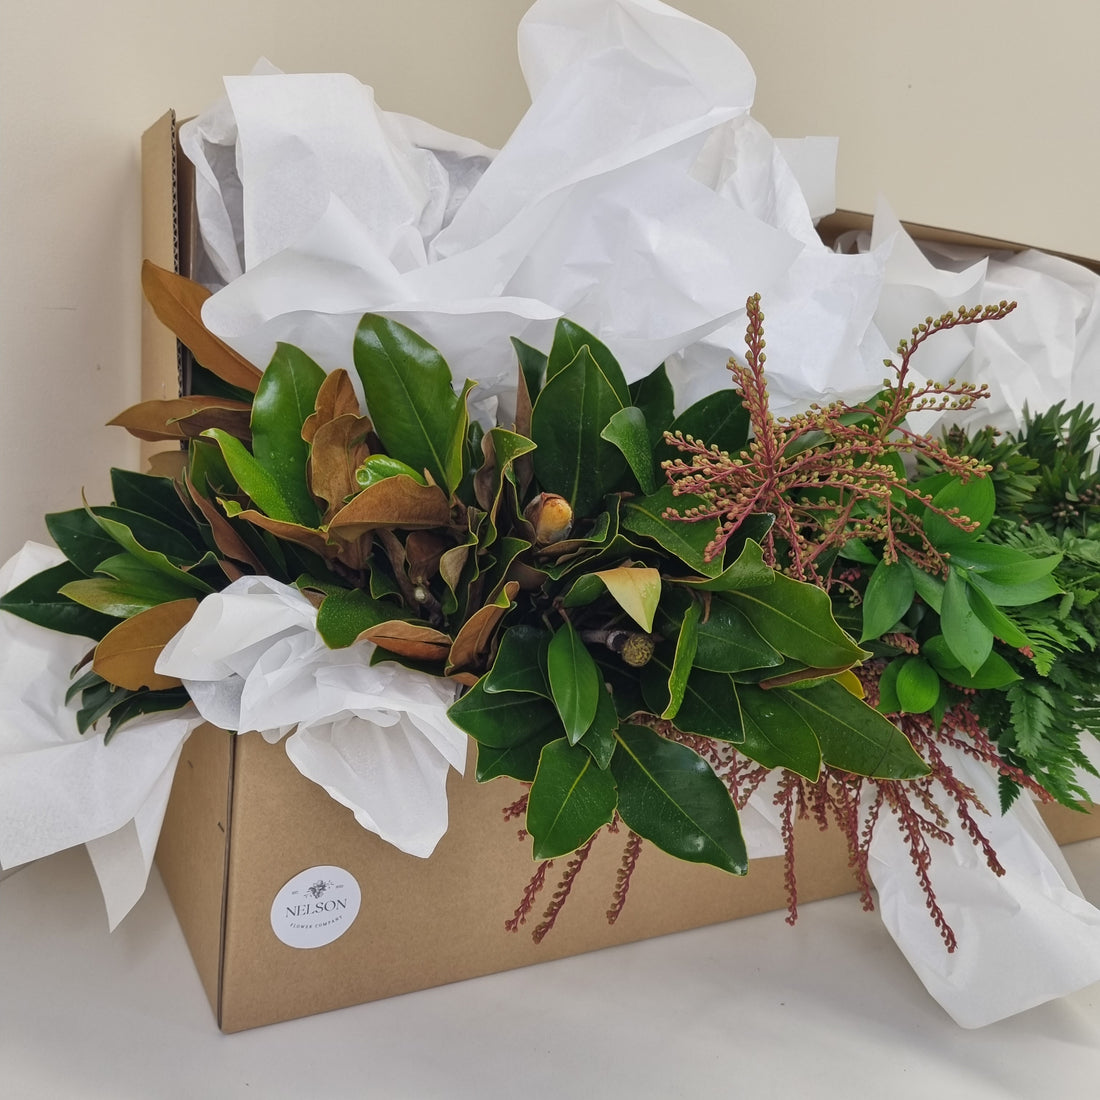 Fresh Greenery box with various leaves and other foliage in a cardboard box with white tissue paper.